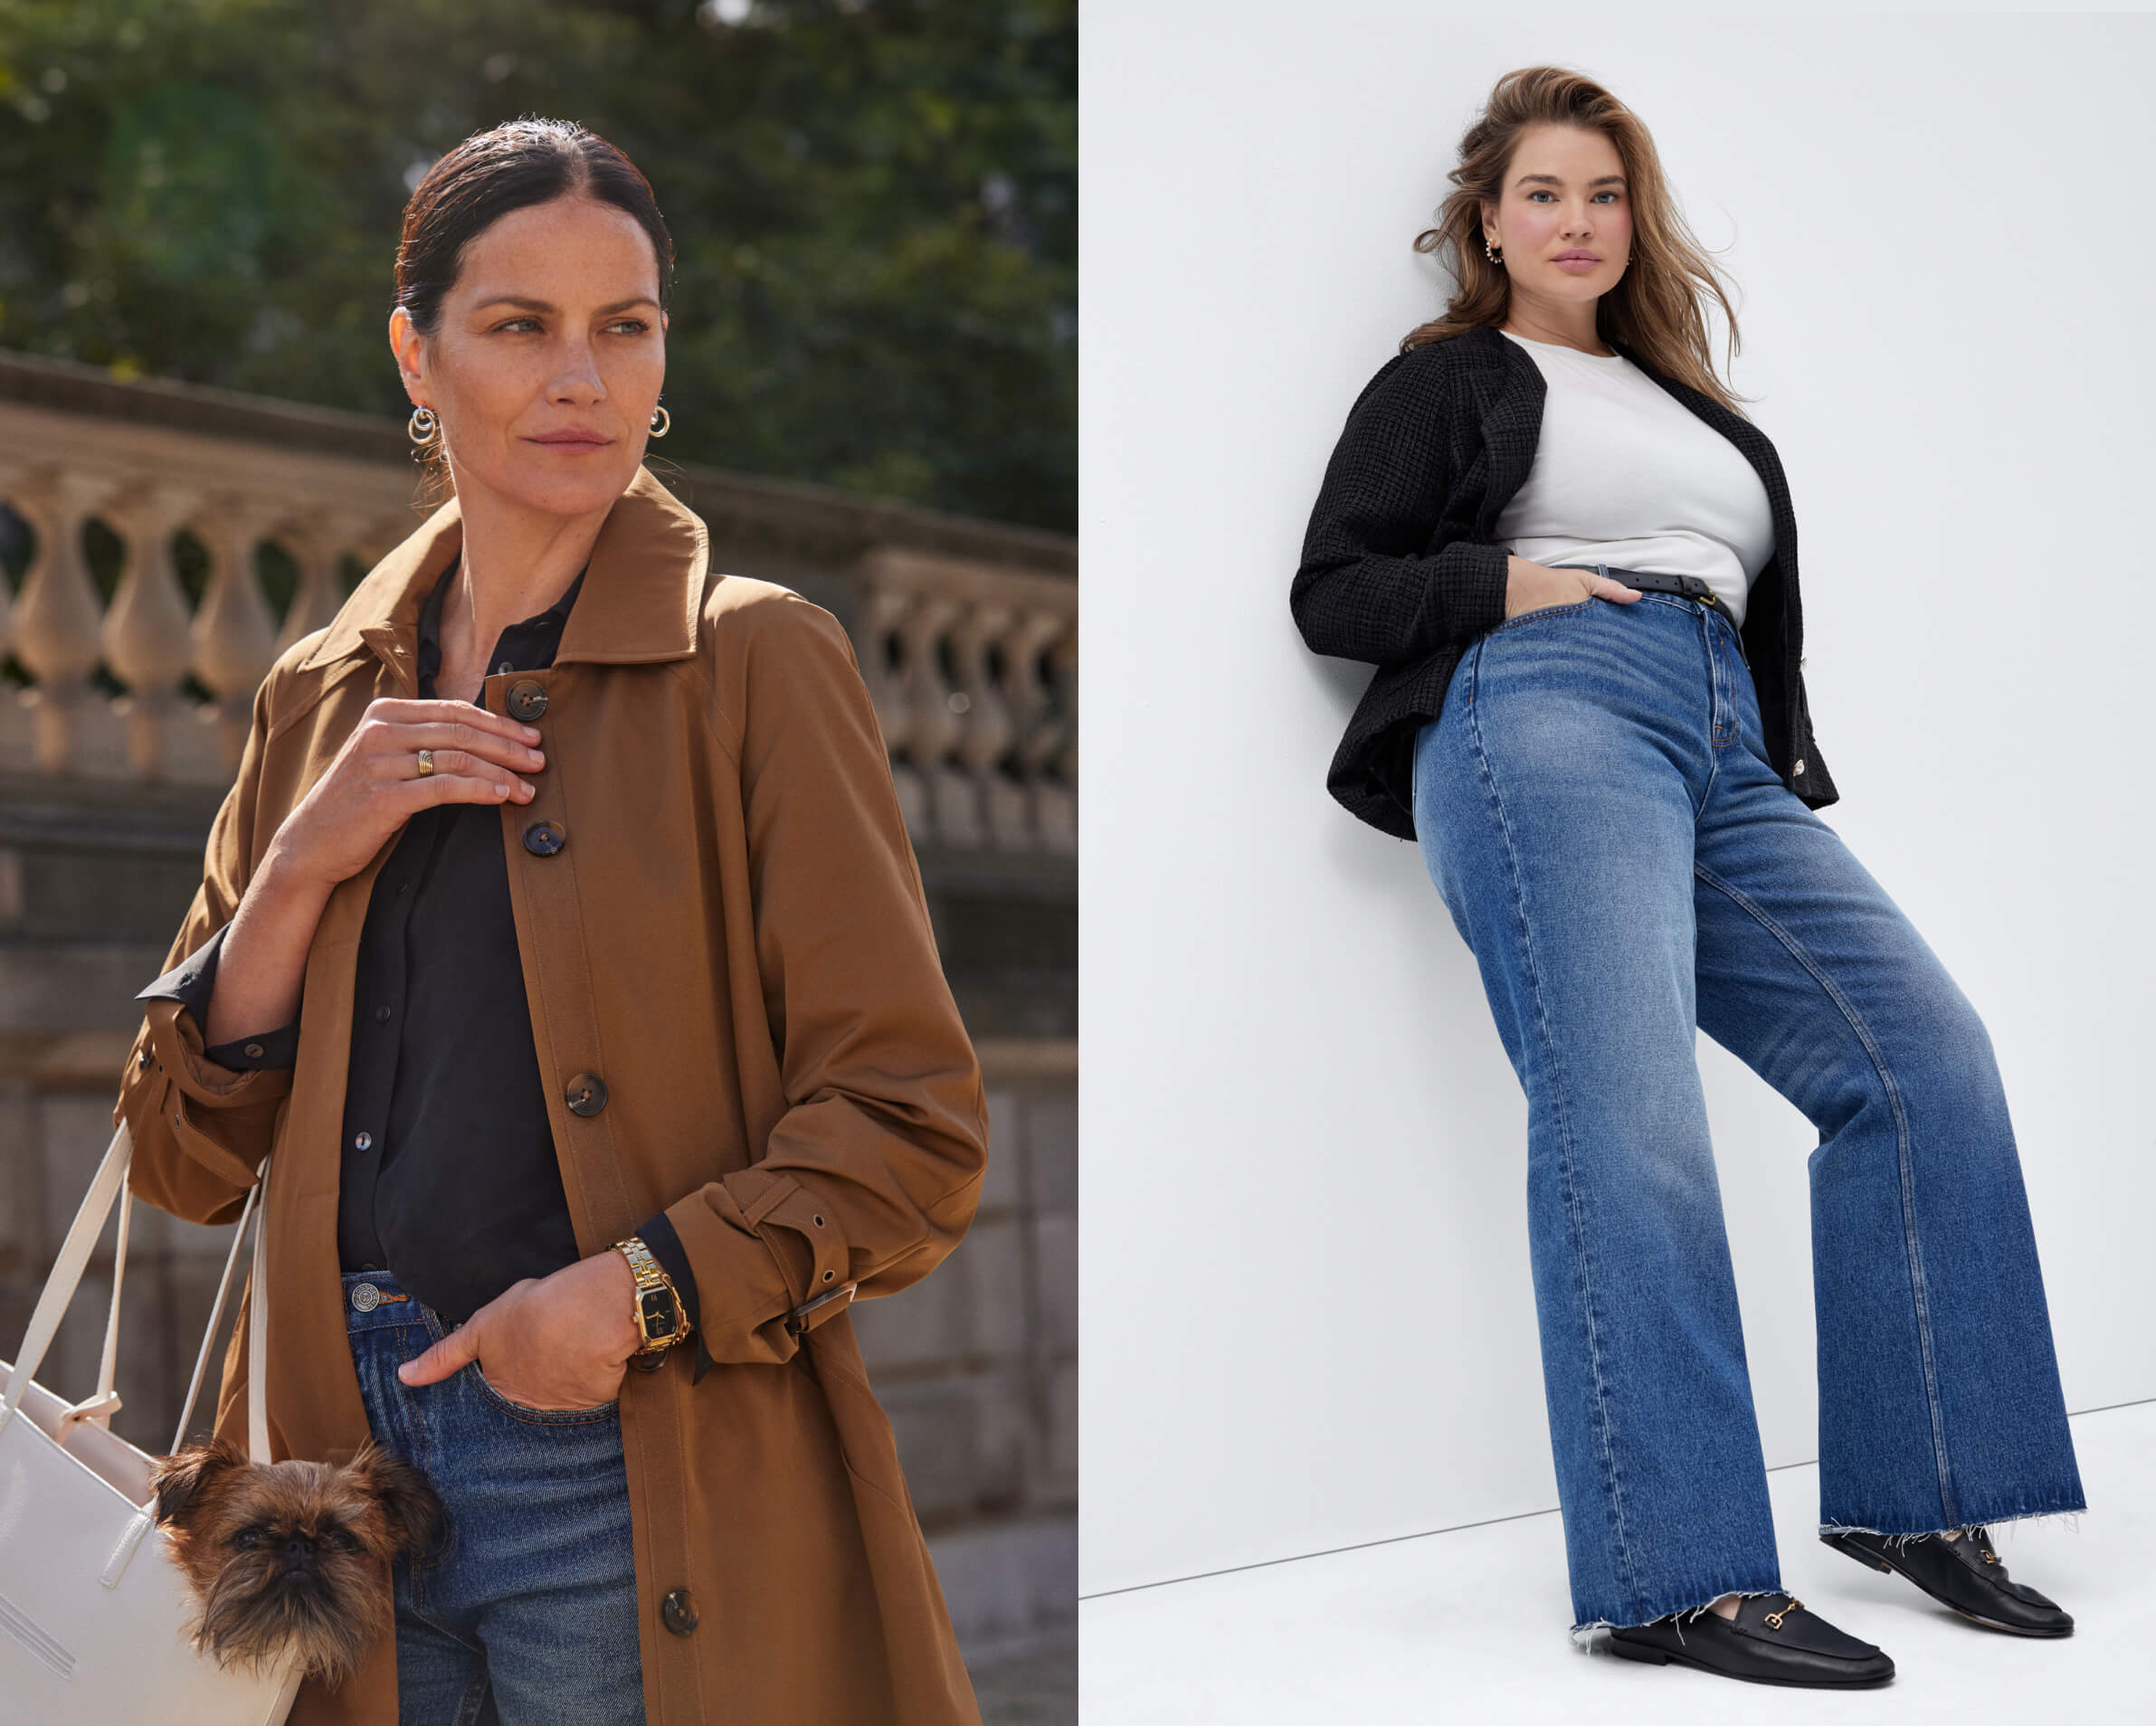 On the left a woman wears a long brown coat over a black button-down shirt and blue jeans, while carrying her dog in her purse and on the right a curvy woman wears an open black blazer, a white shirt, blue flare jeans and black flats.